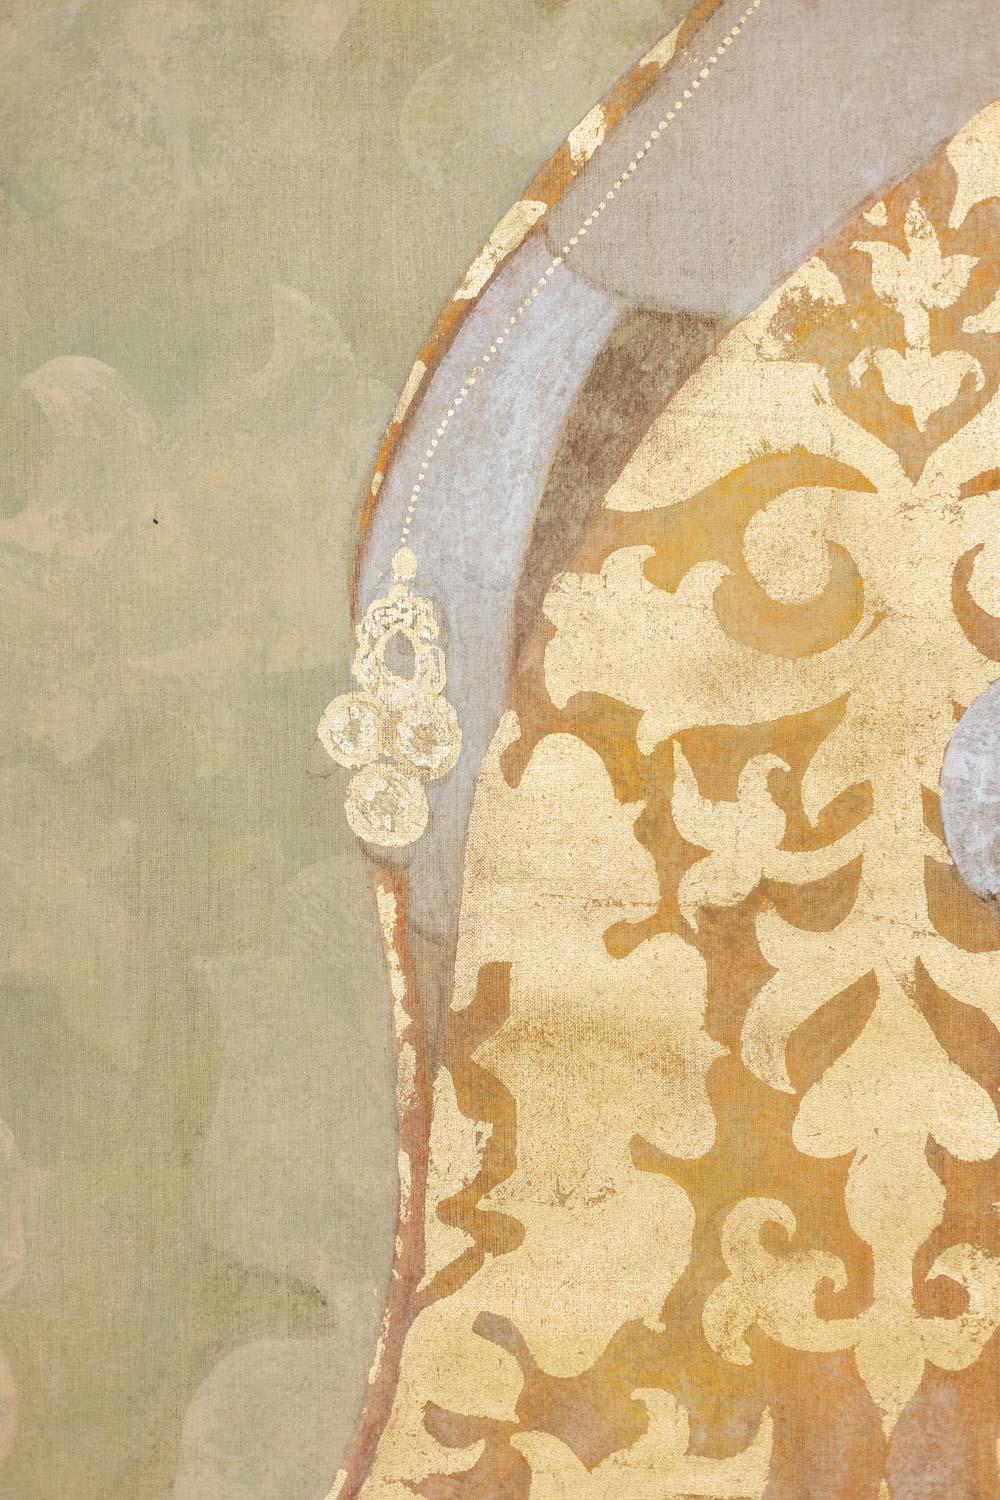 Painted canvas in Renaissance style, representing a lady in profile dressed in clothes typical of this period: dress decorated with golden scrolls, low-shaped hat and hair raised in rolls decorated with a gold chain. She wears a gold chain. Green